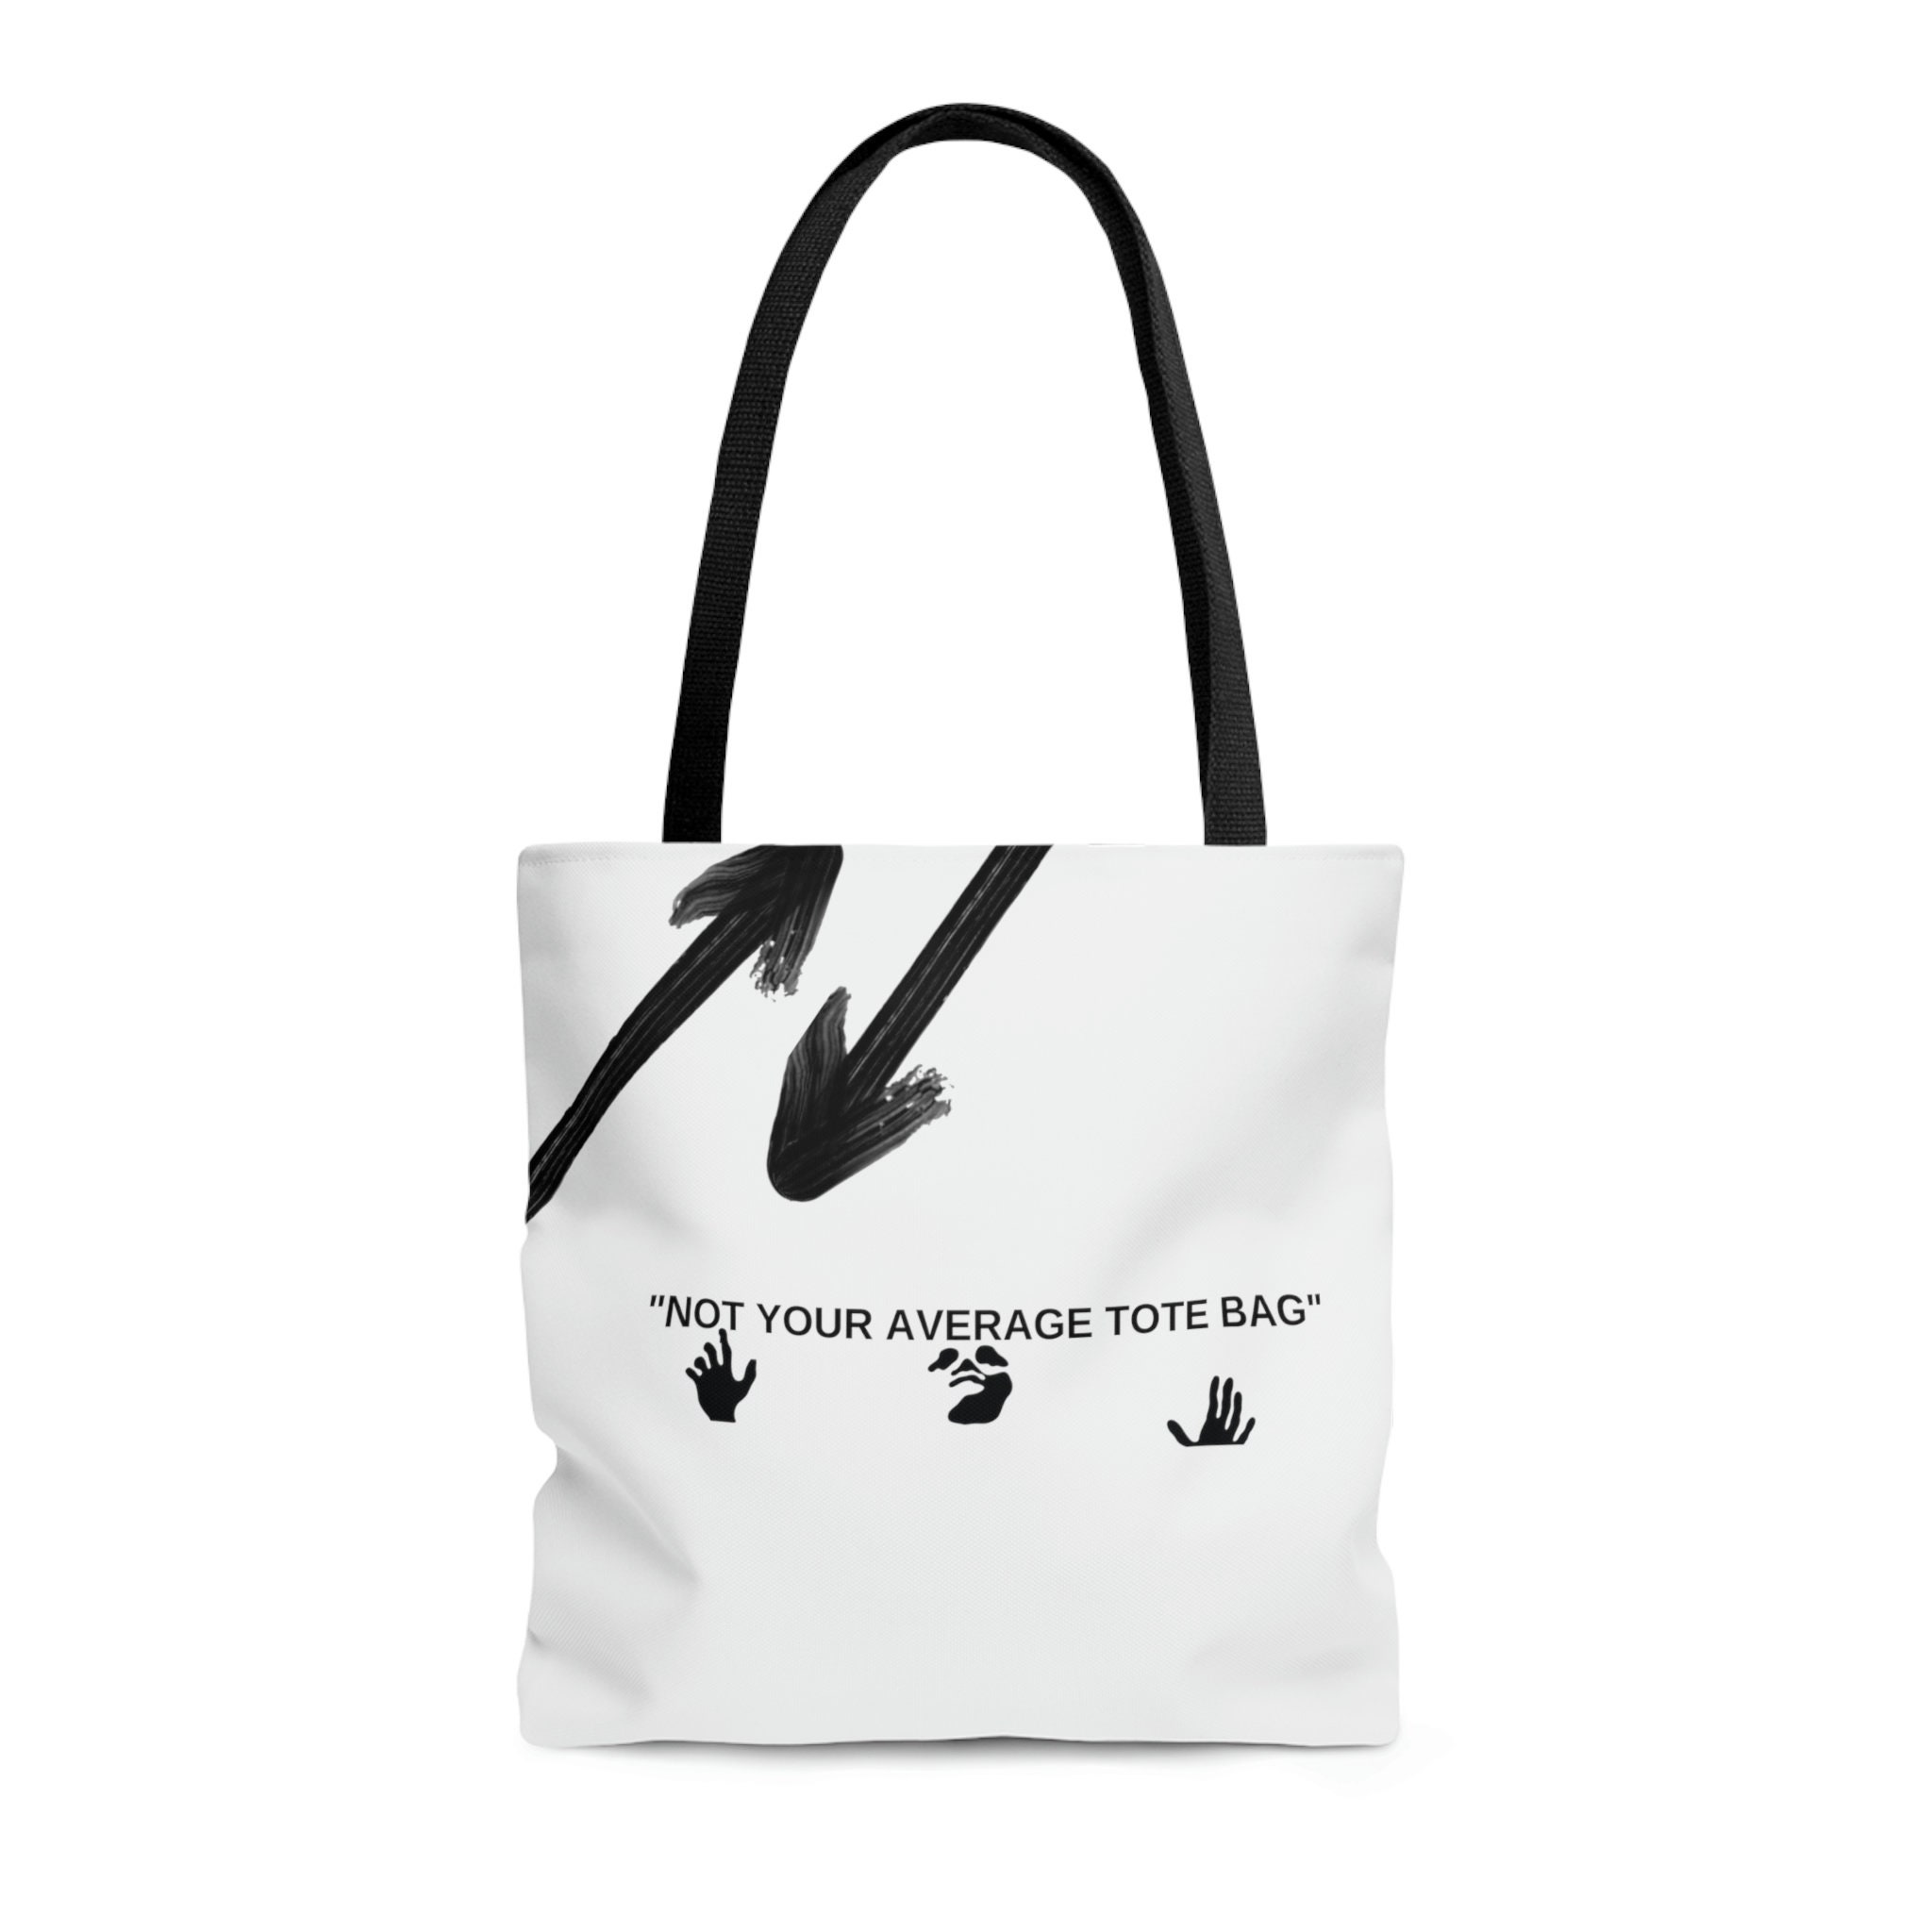 Details 84+ off white bags - in.cdgdbentre